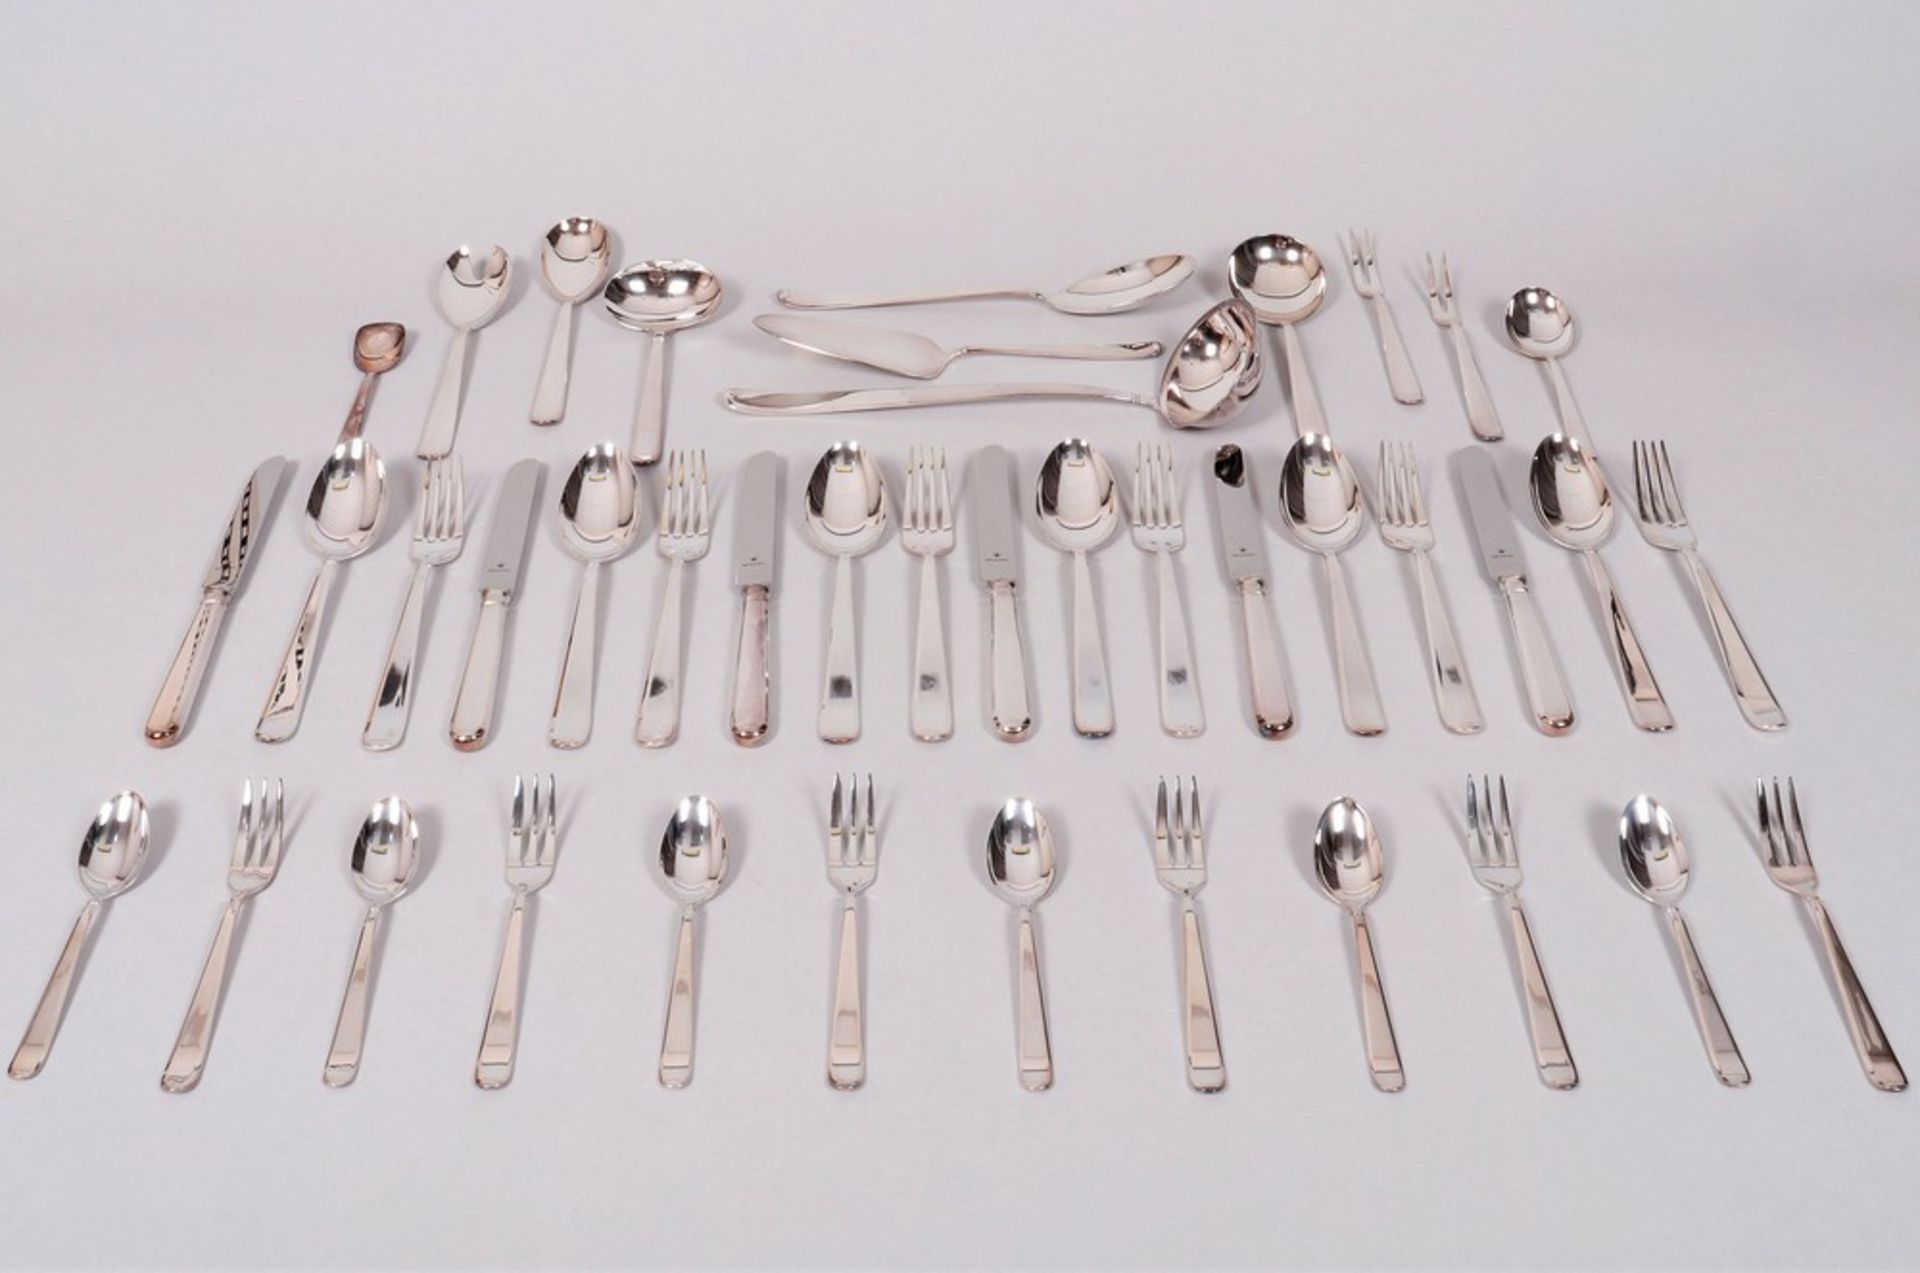 Cutlery set for 6 persons, 800 silver, Wilkens, 20th C., 41 pcs. - Image 2 of 5